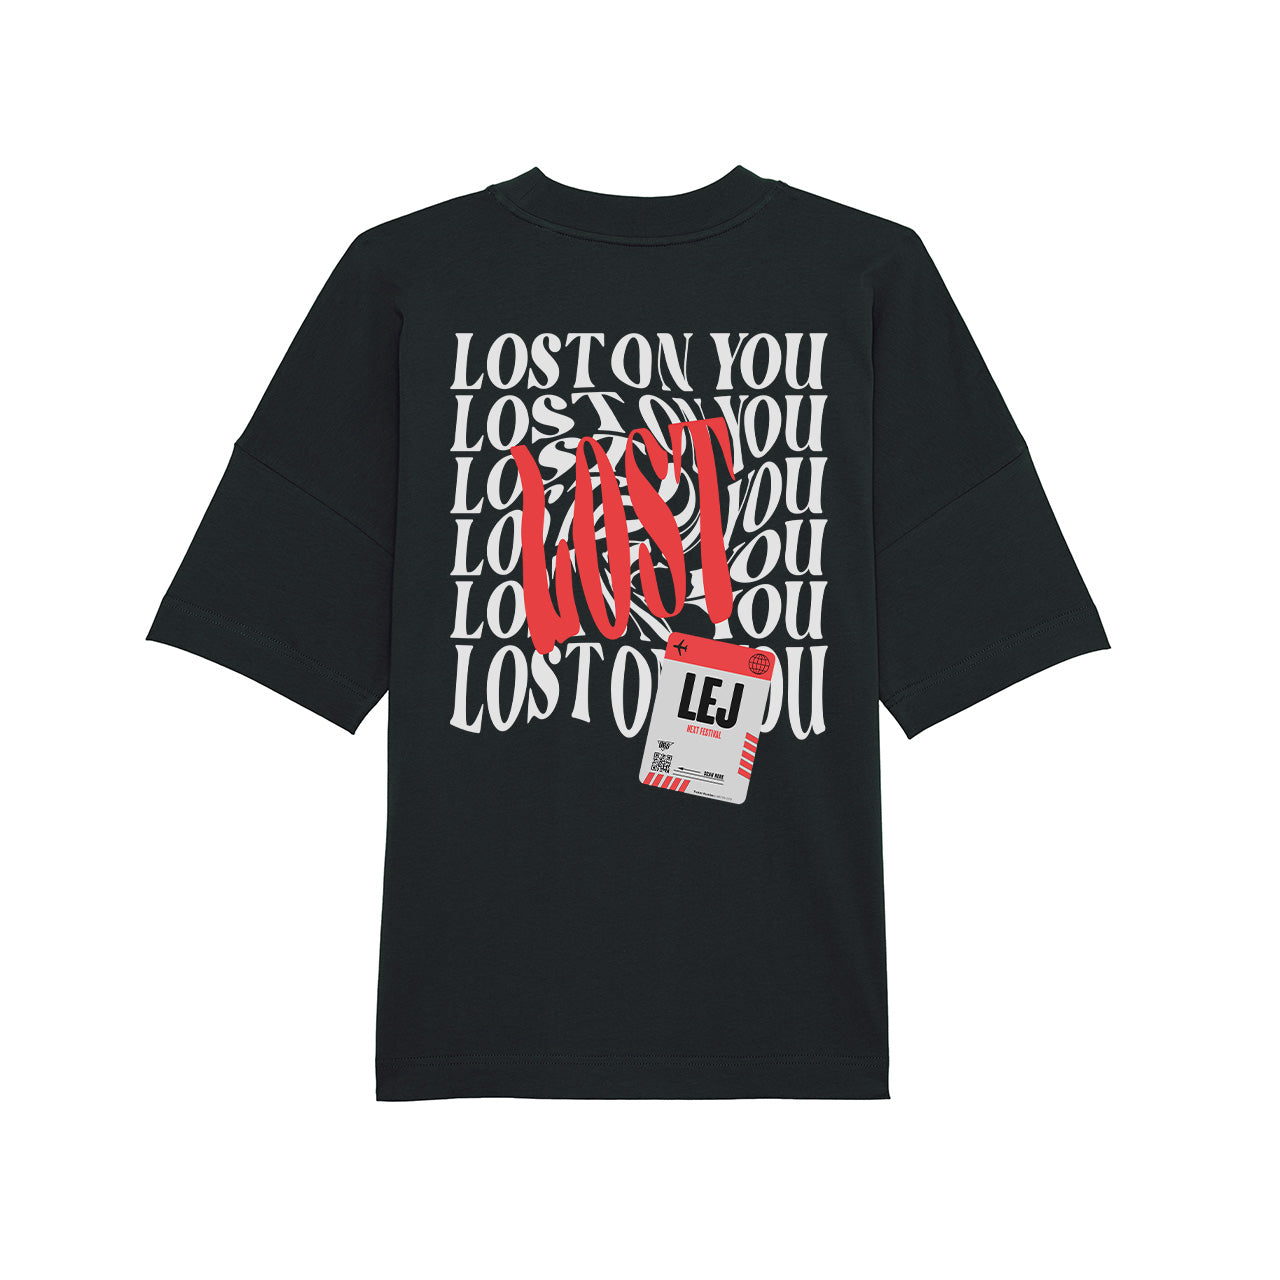 OBS - Lost on you - Shirt - Black